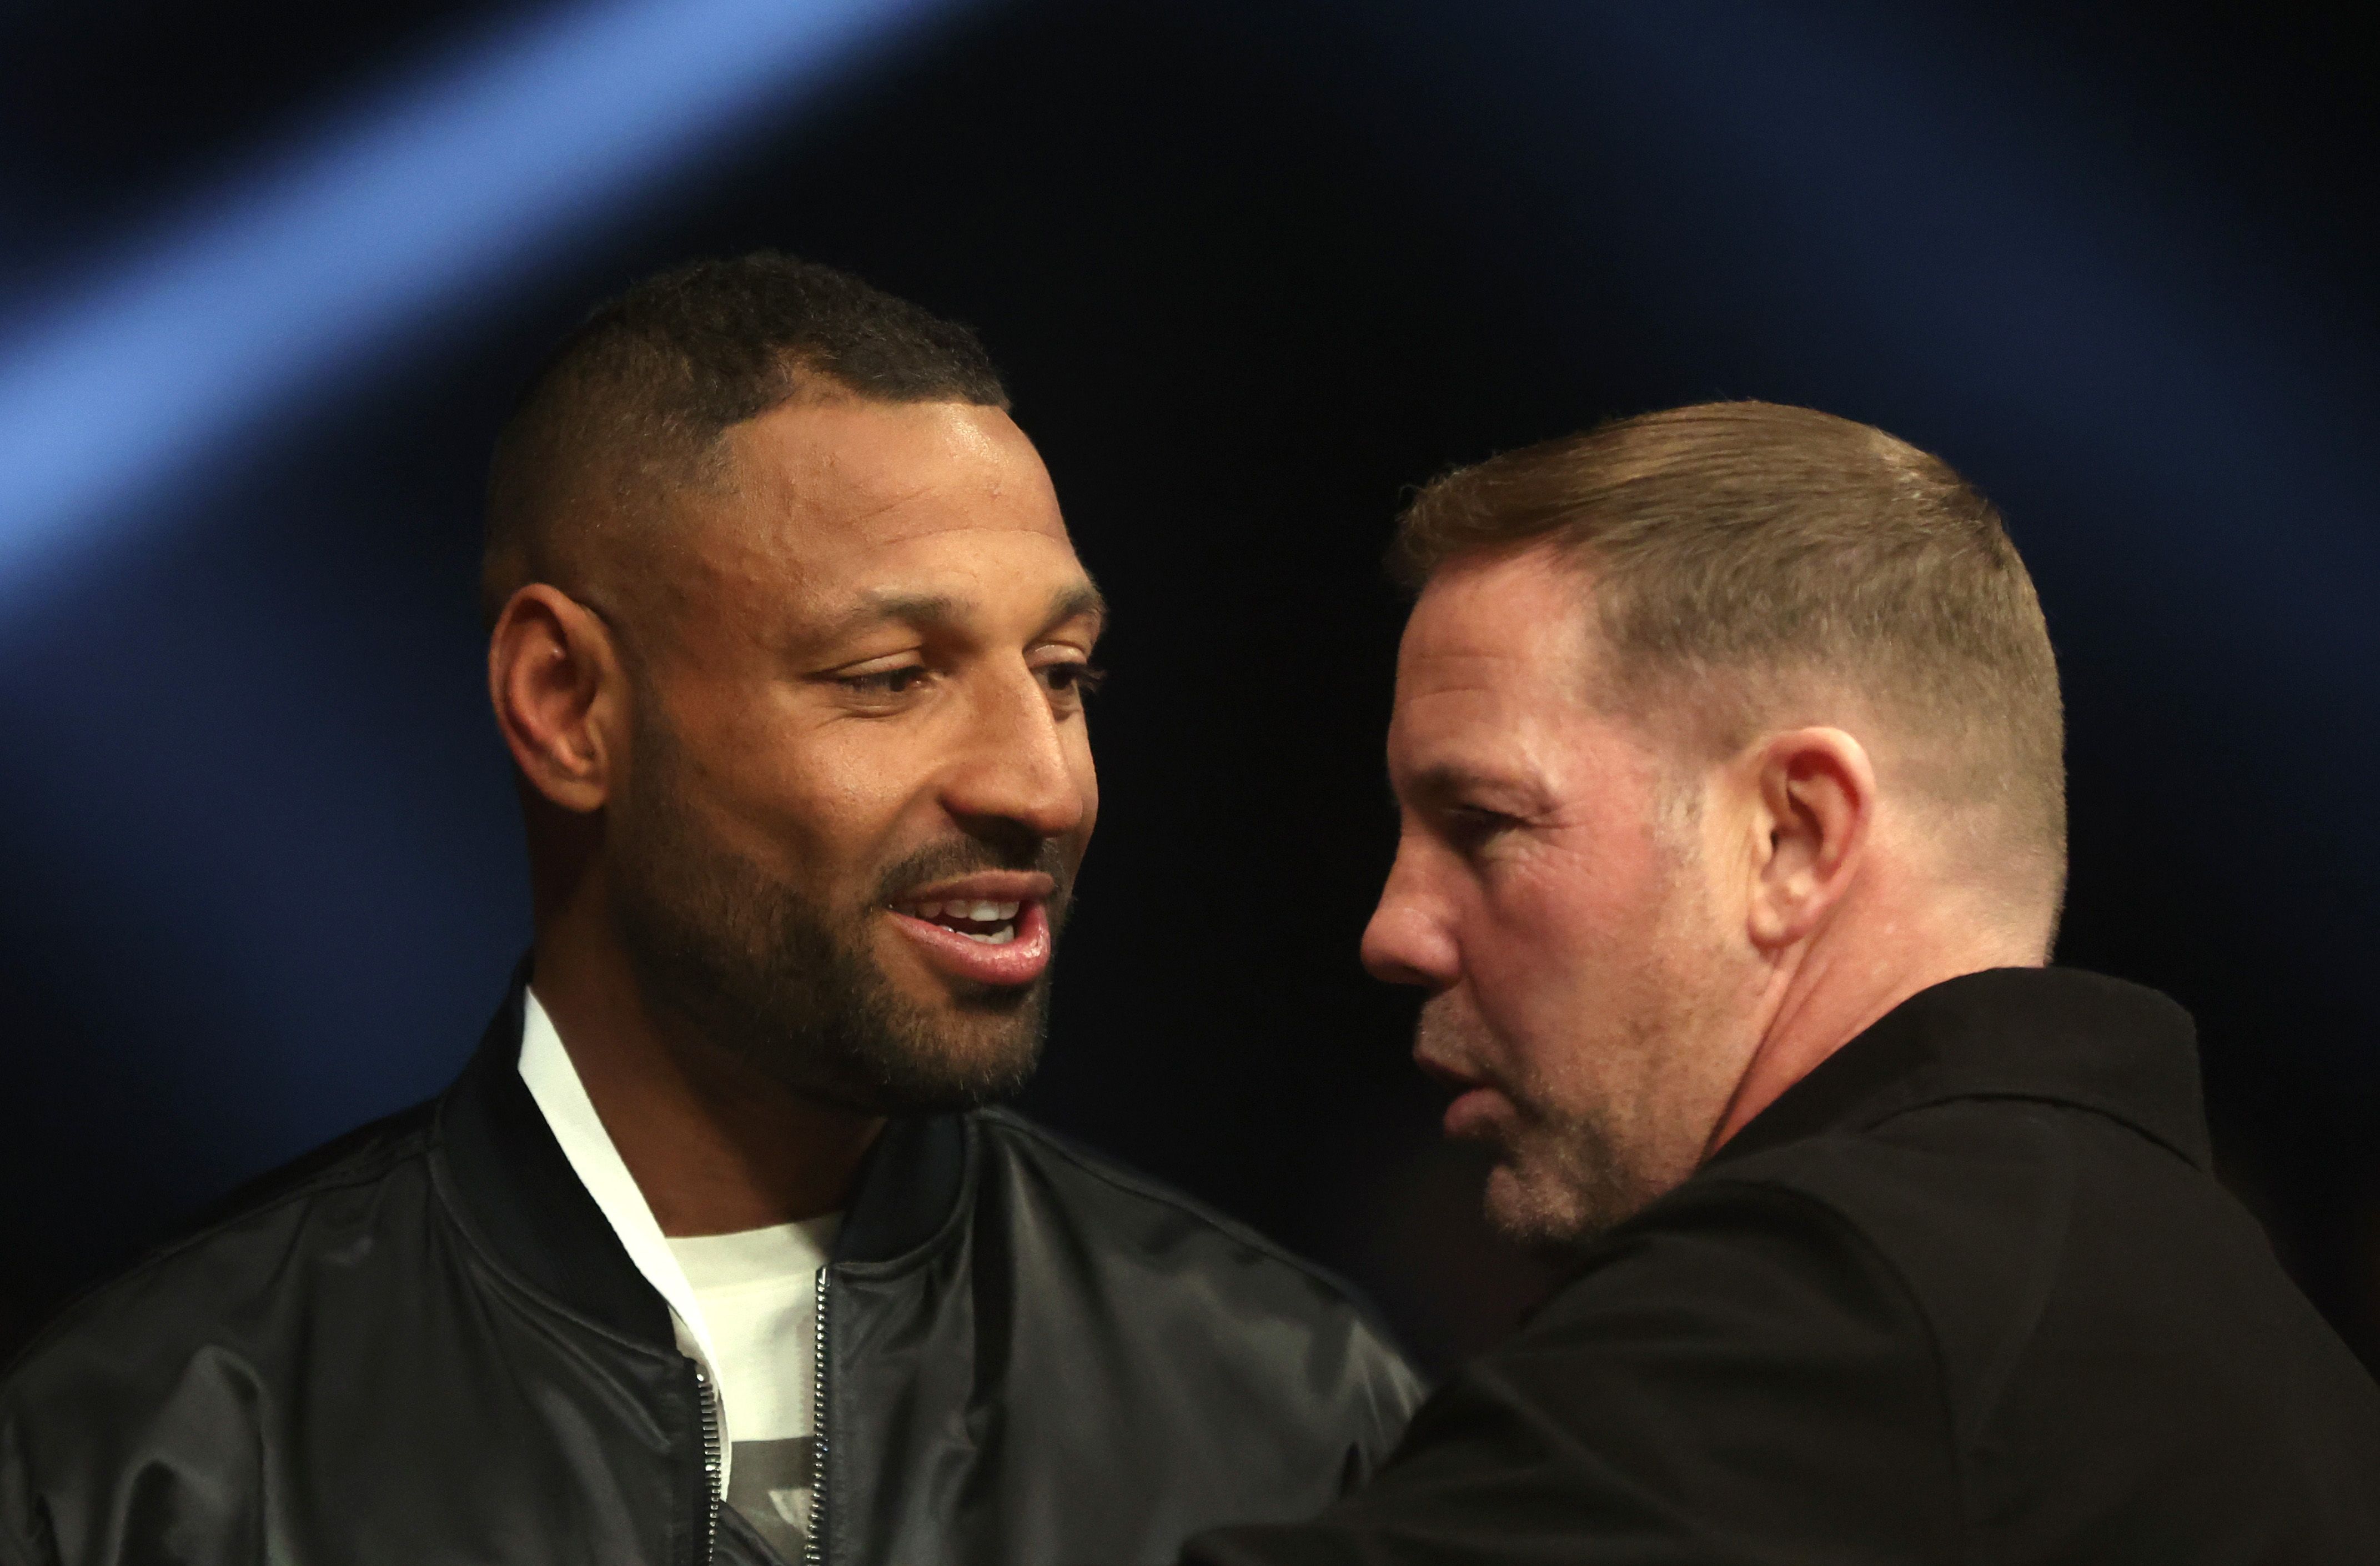 Kell Brook announced his retirement from boxing at the age of 36